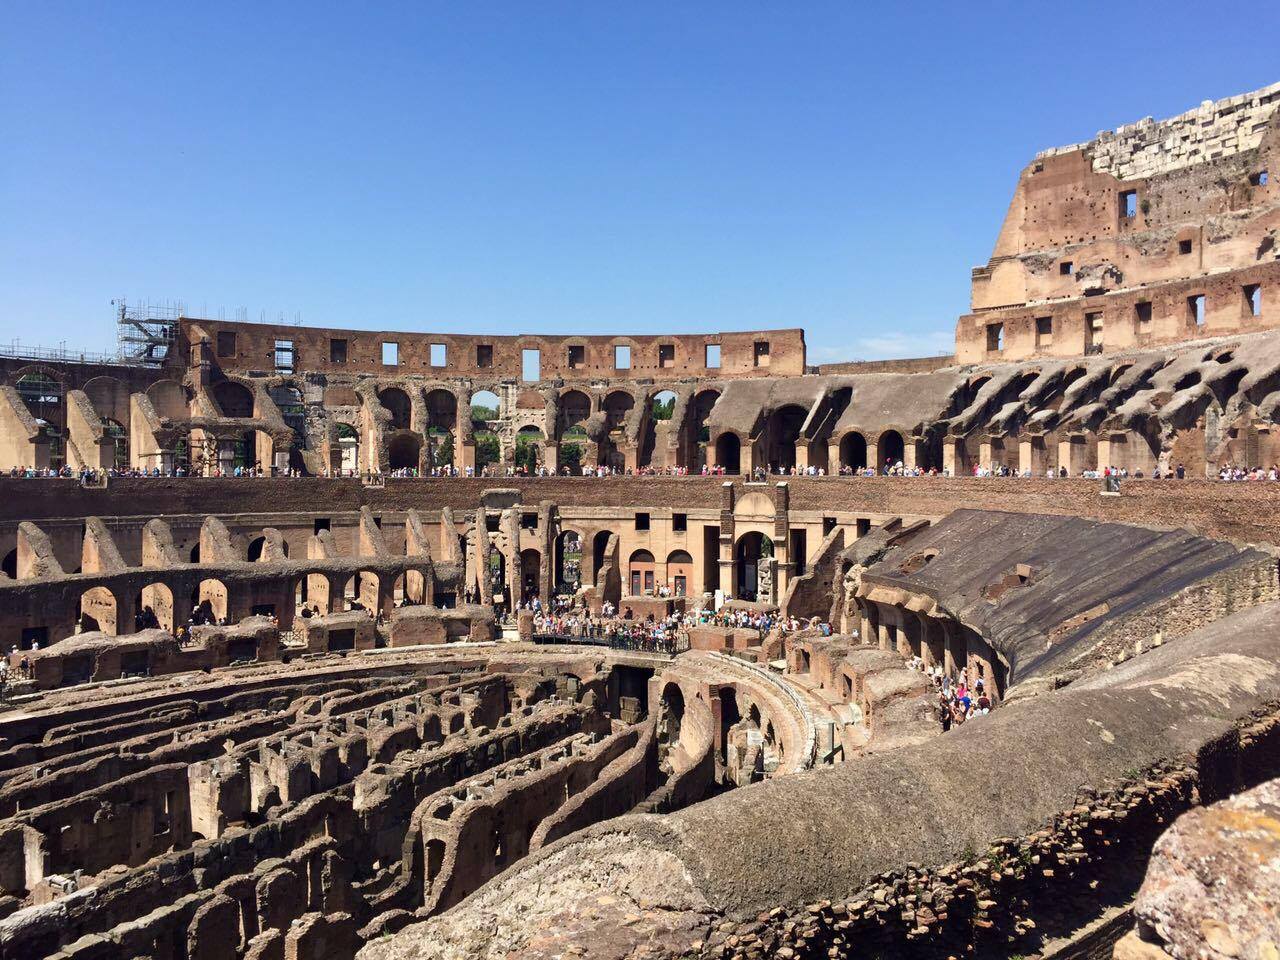  Of course, any visit to Rome would be somewhat incomplete without a visit to the  Colosseum . Be aware that the lines can get extremely long here, and visitors can wait for hours to enter on a given busy summer day. 